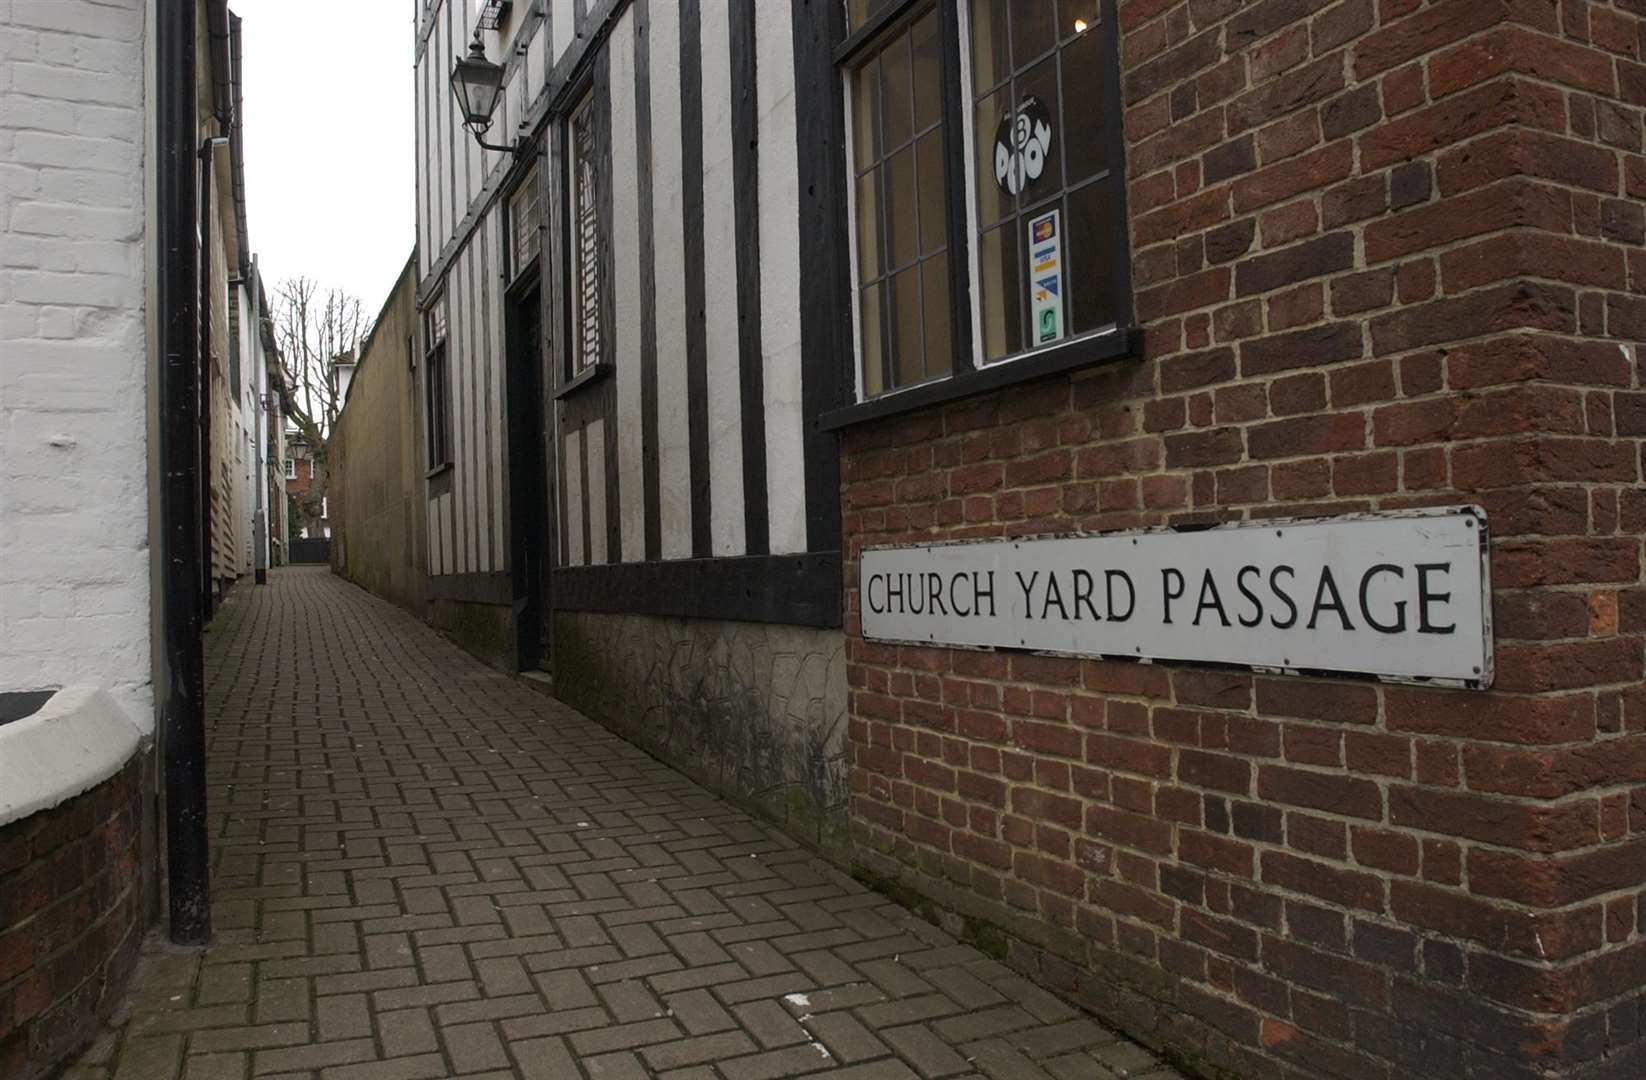 The attack reportedly took place in Church Yard Passage